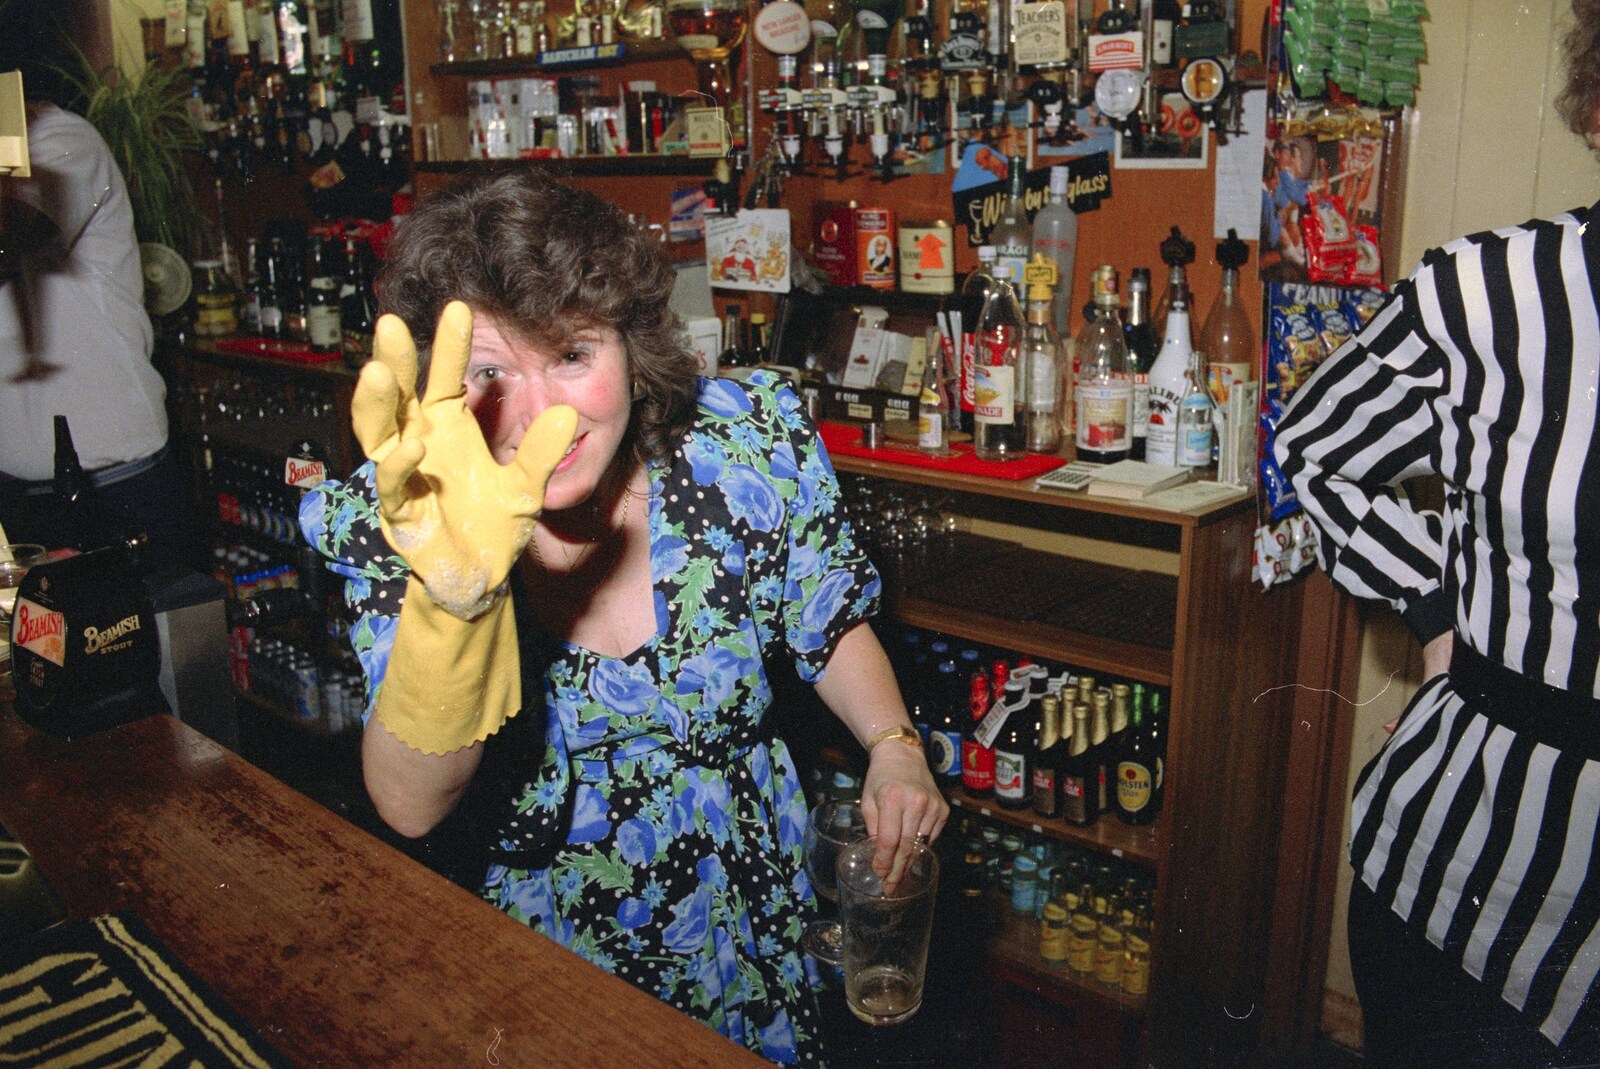 Sylvia gives it some with the rubber gloves from New Year's Eve at the Swan Inn, Brome, Suffolk - 31st December 1991